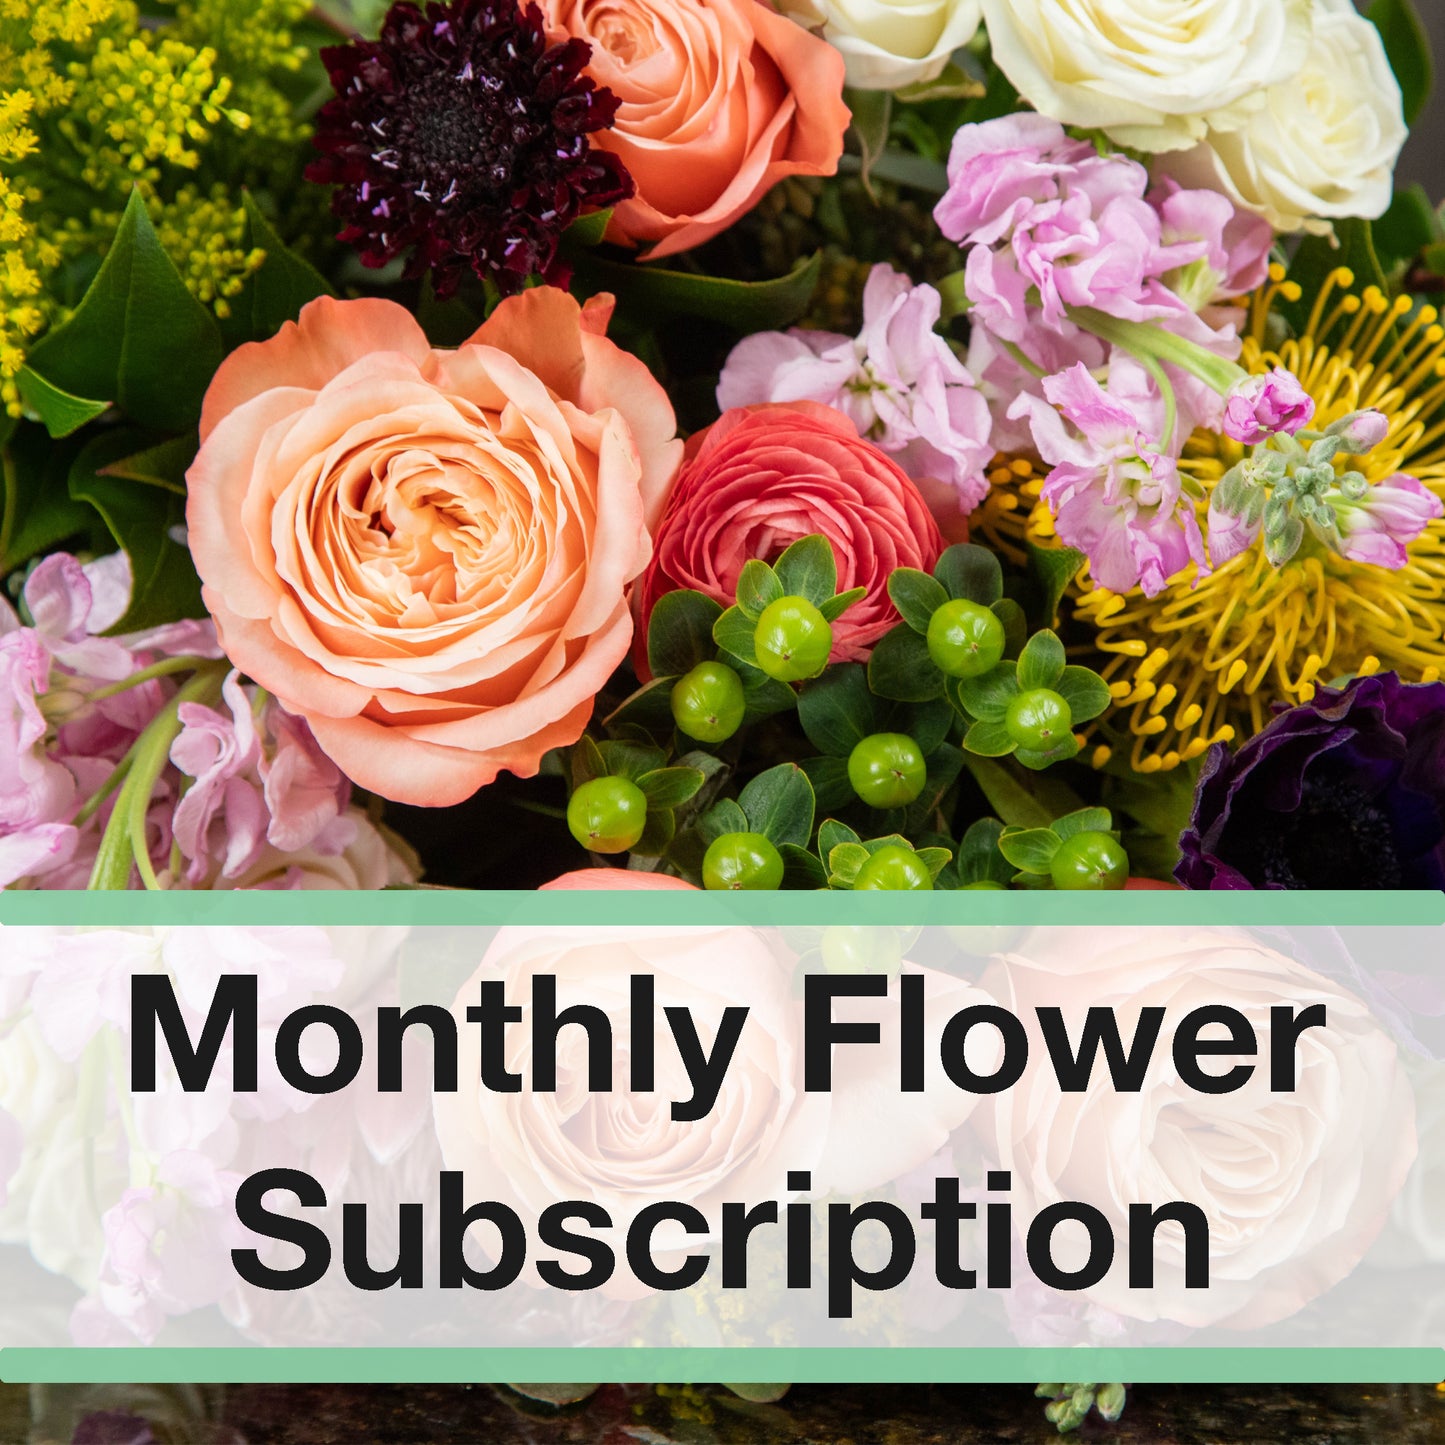 "monthly flower subscription" written below a variety of colorful flowers